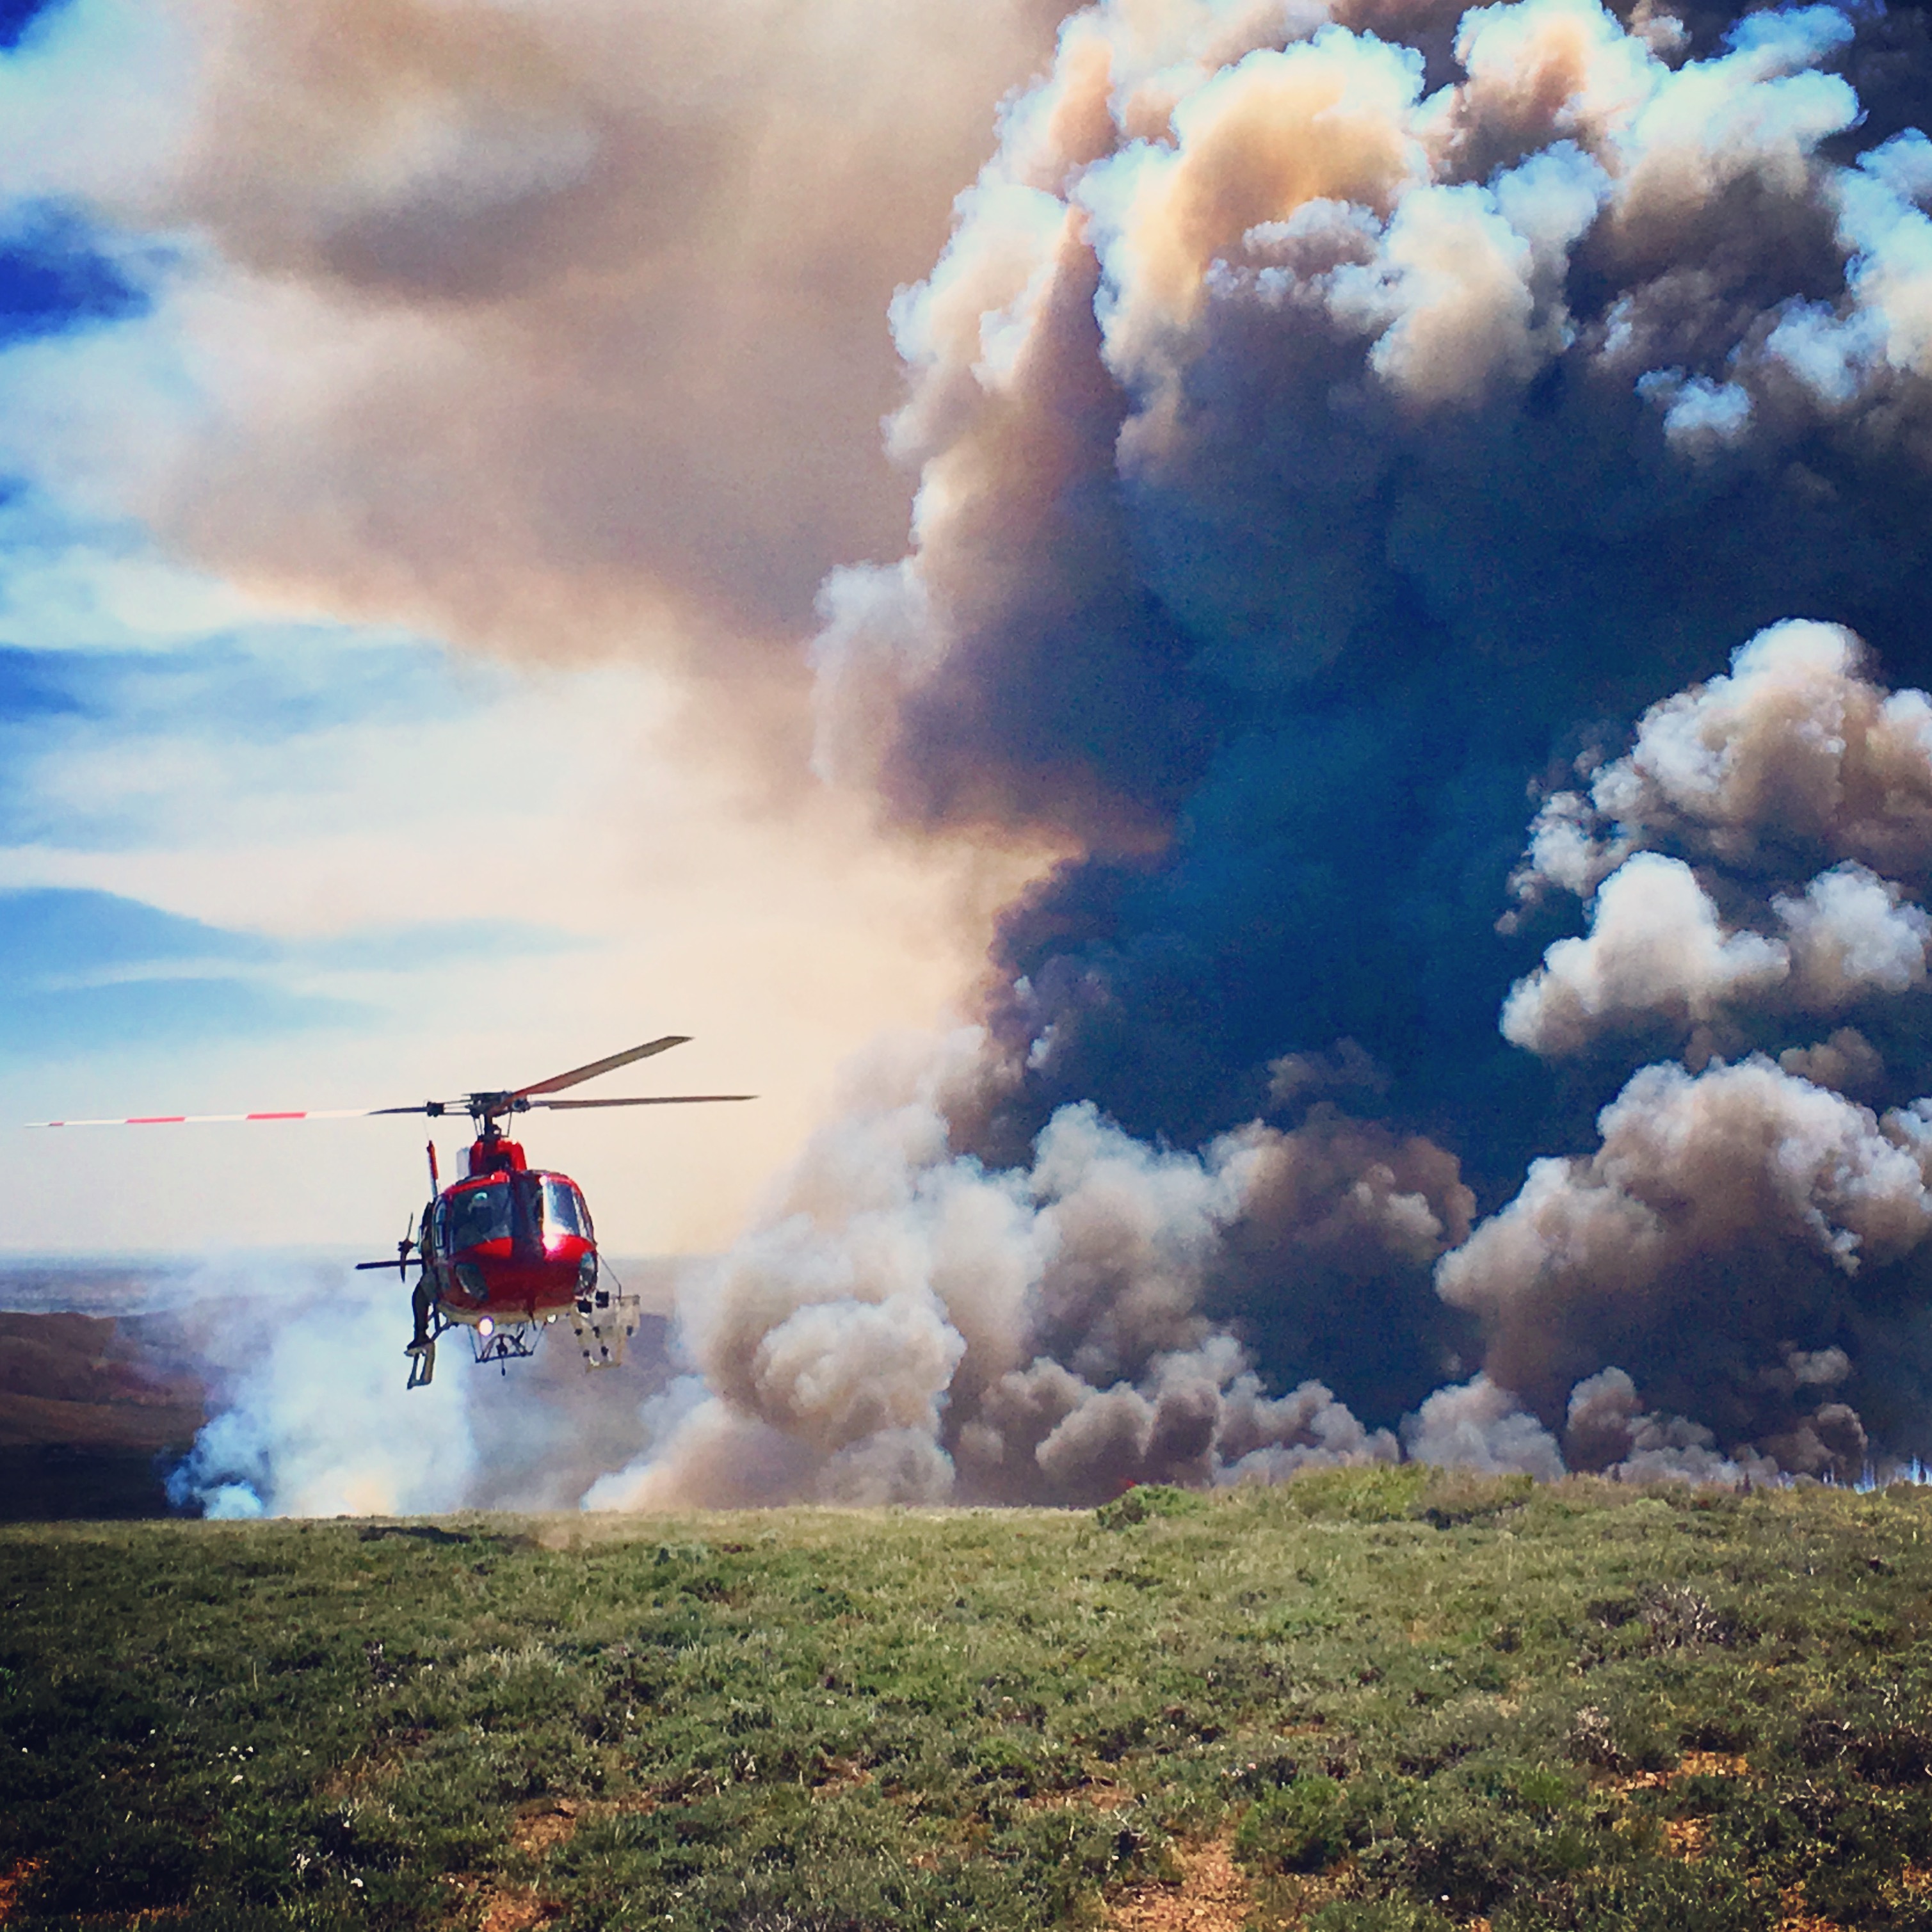 A helicopter provides aerial support on the Burdick Prescribed Fire. Photo by TravisCavenah